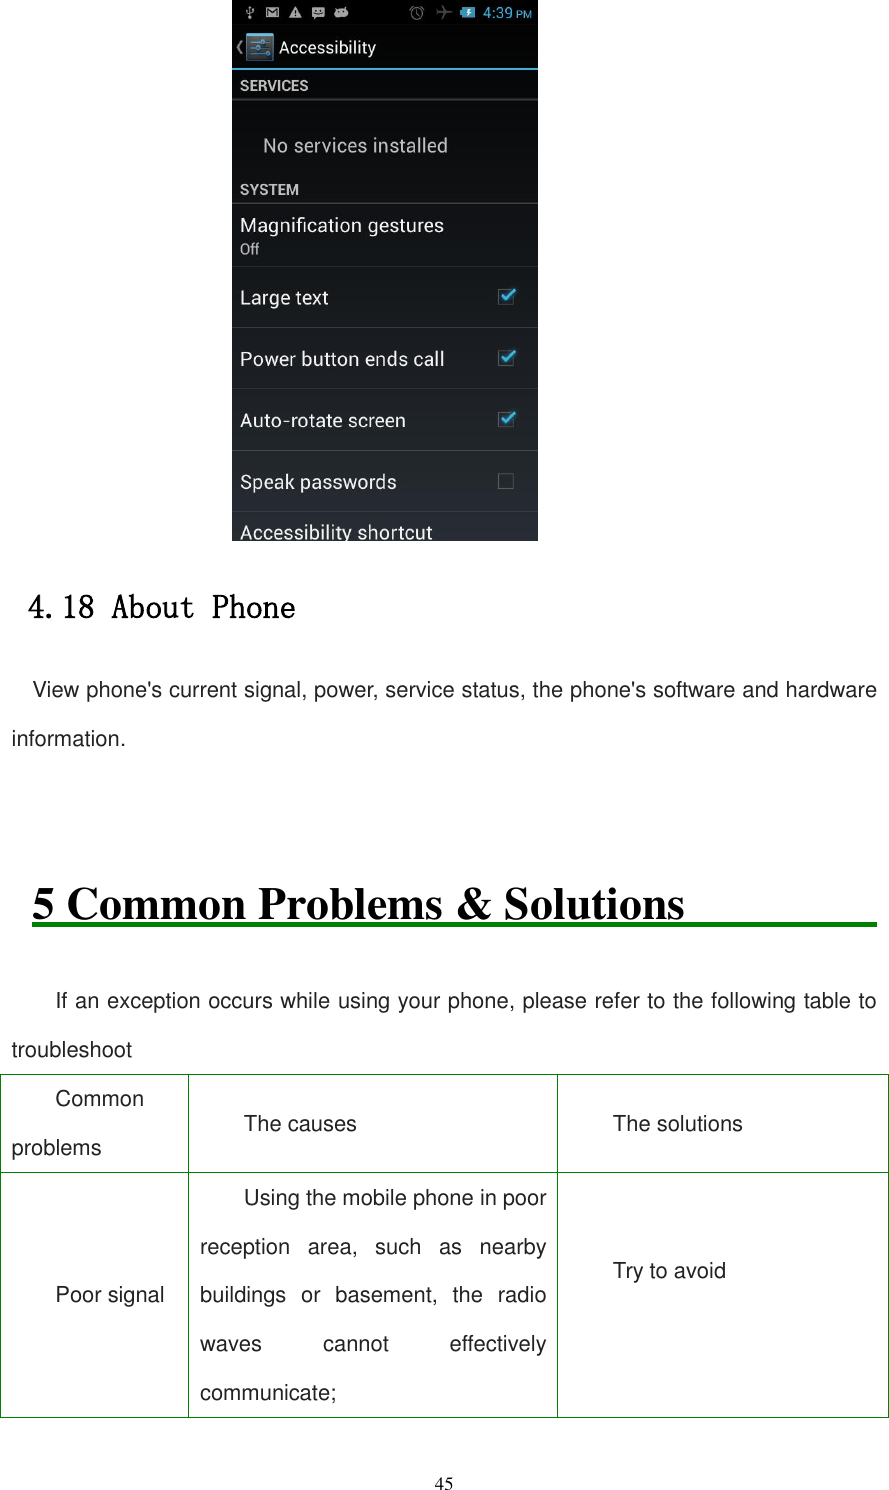   45  4.18 About Phone View phone&apos;s current signal, power, service status, the phone&apos;s software and hardware information.   5 Common Problems &amp; Solutions               If an exception occurs while using your phone, please refer to the following table to troubleshoot Common problems The causes   The solutions Poor signal Using the mobile phone in poor reception  area,  such  as  nearby buildings  or  basement,  the  radio waves  cannot  effectively communicate; Try to avoid  